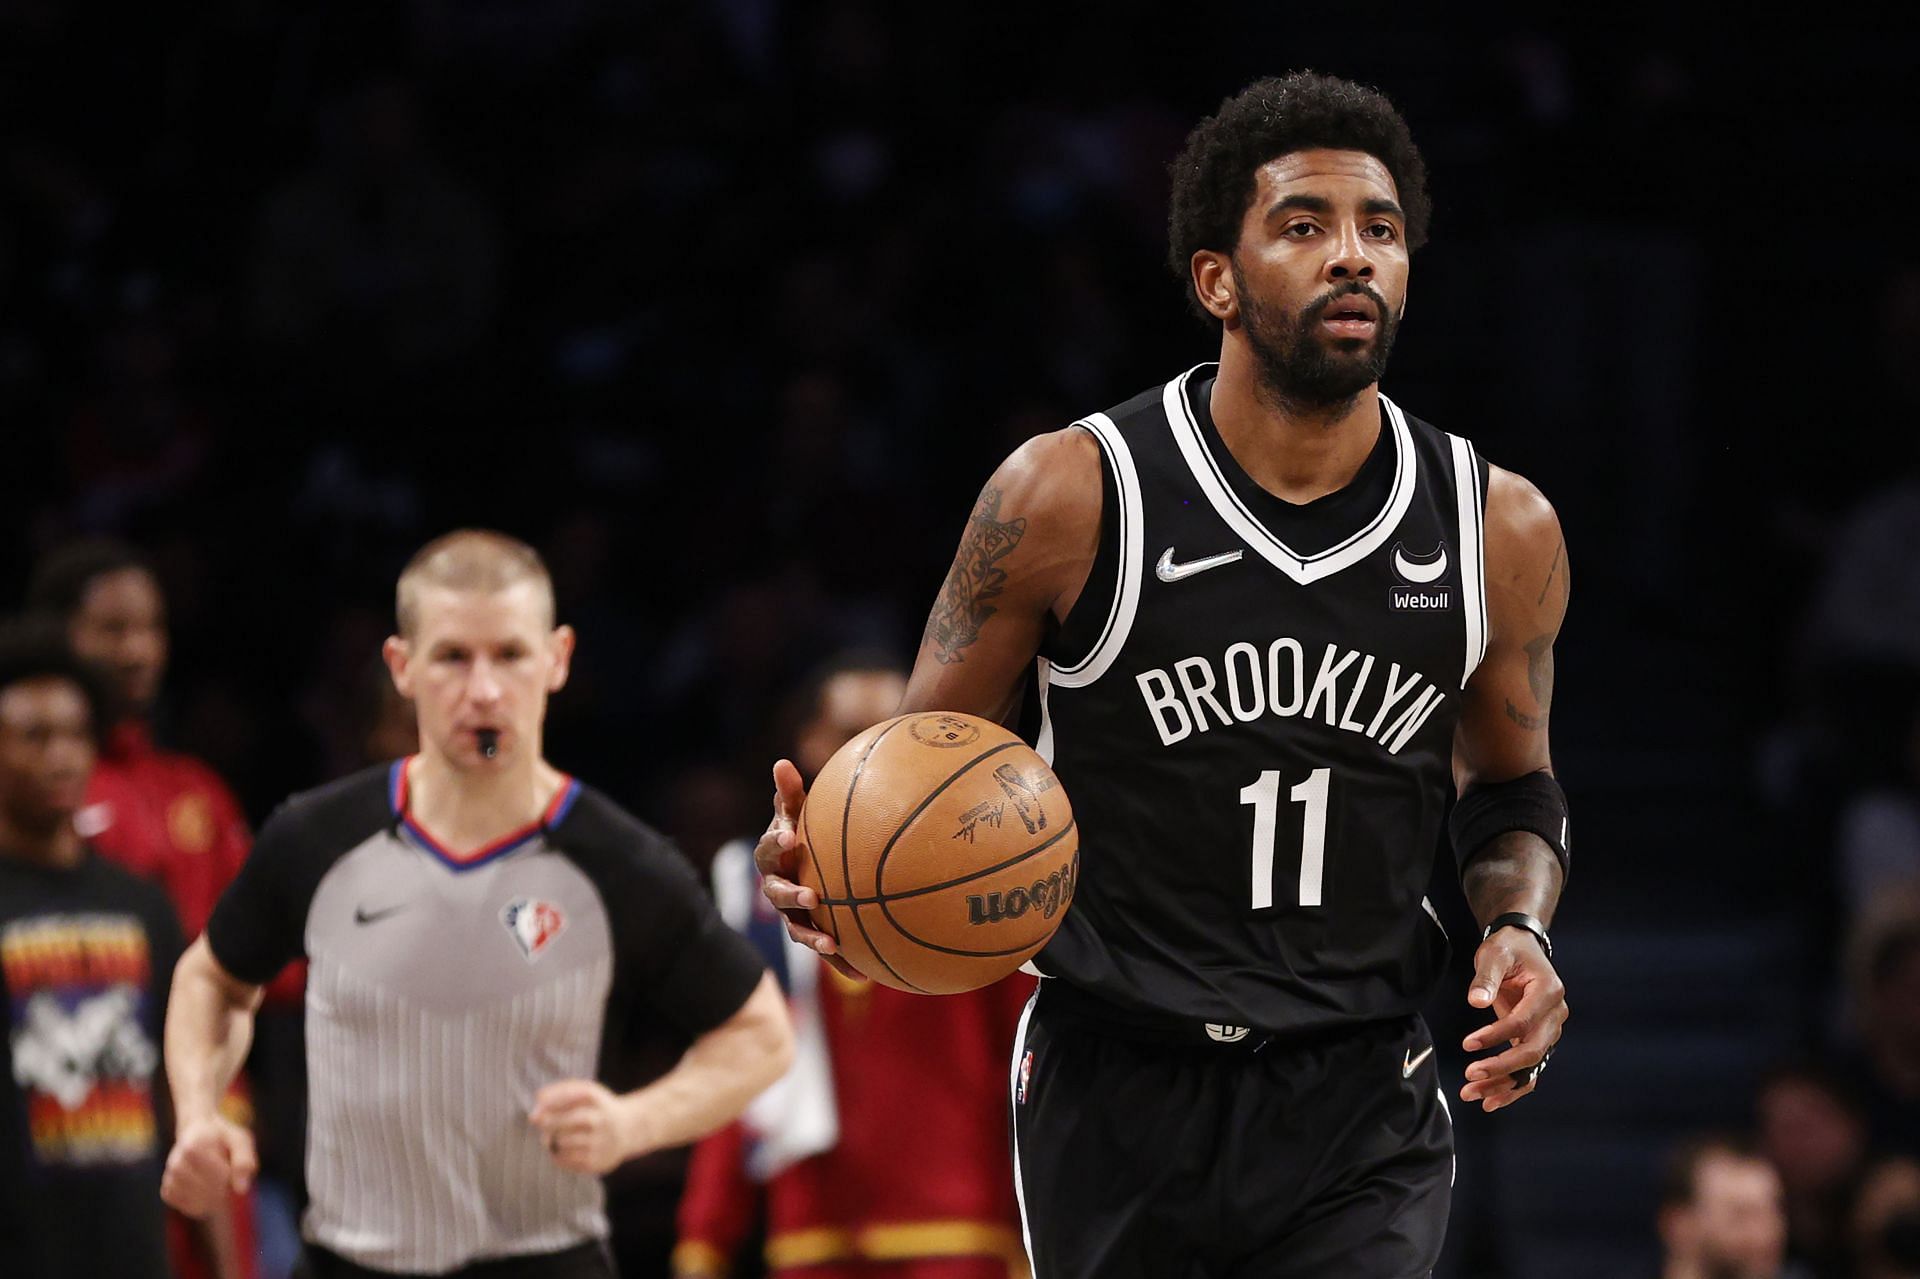 Kyrie Irving scored 34 points in the Brooklyn Nets&#039; play-in game vs the Cleveland Cavaliers